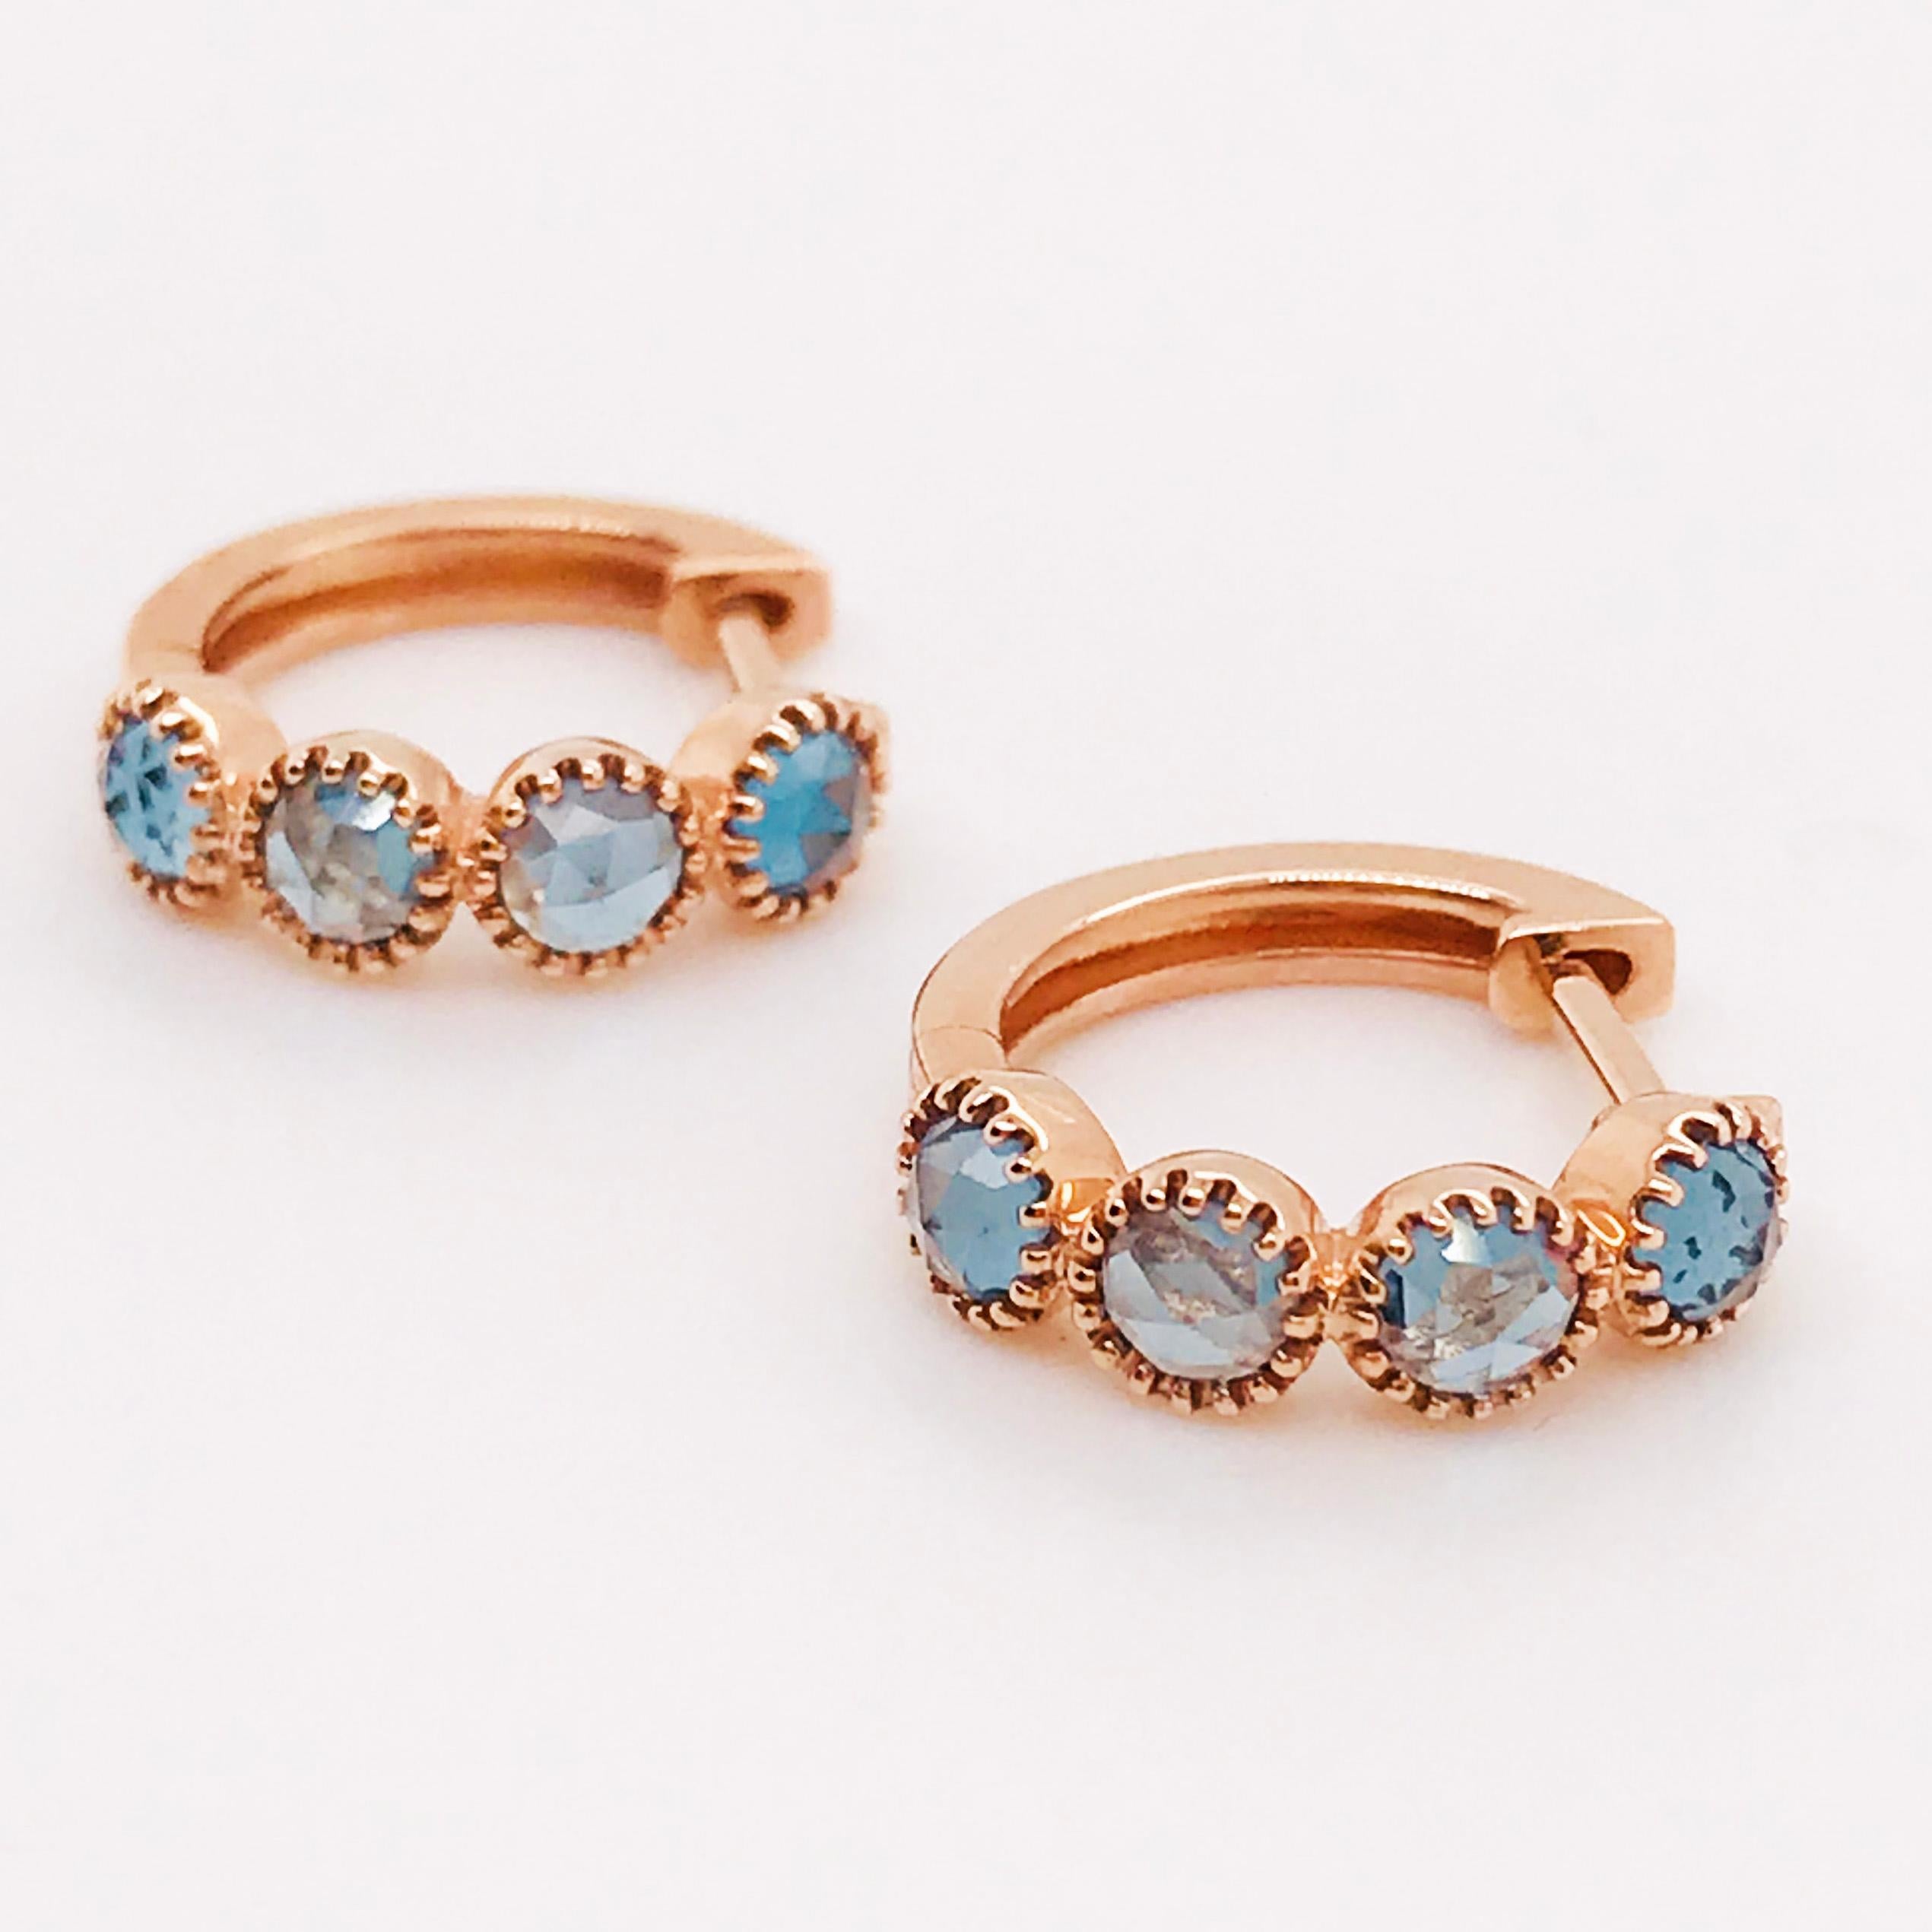 These mini hoop earrings (or huggies) are so special and unique. With genuine London blue topaz gemstones set in rose gold beaded settings. The ocean blue gemstone is complimented beautifully with the rose gold settings. These earrings are a great